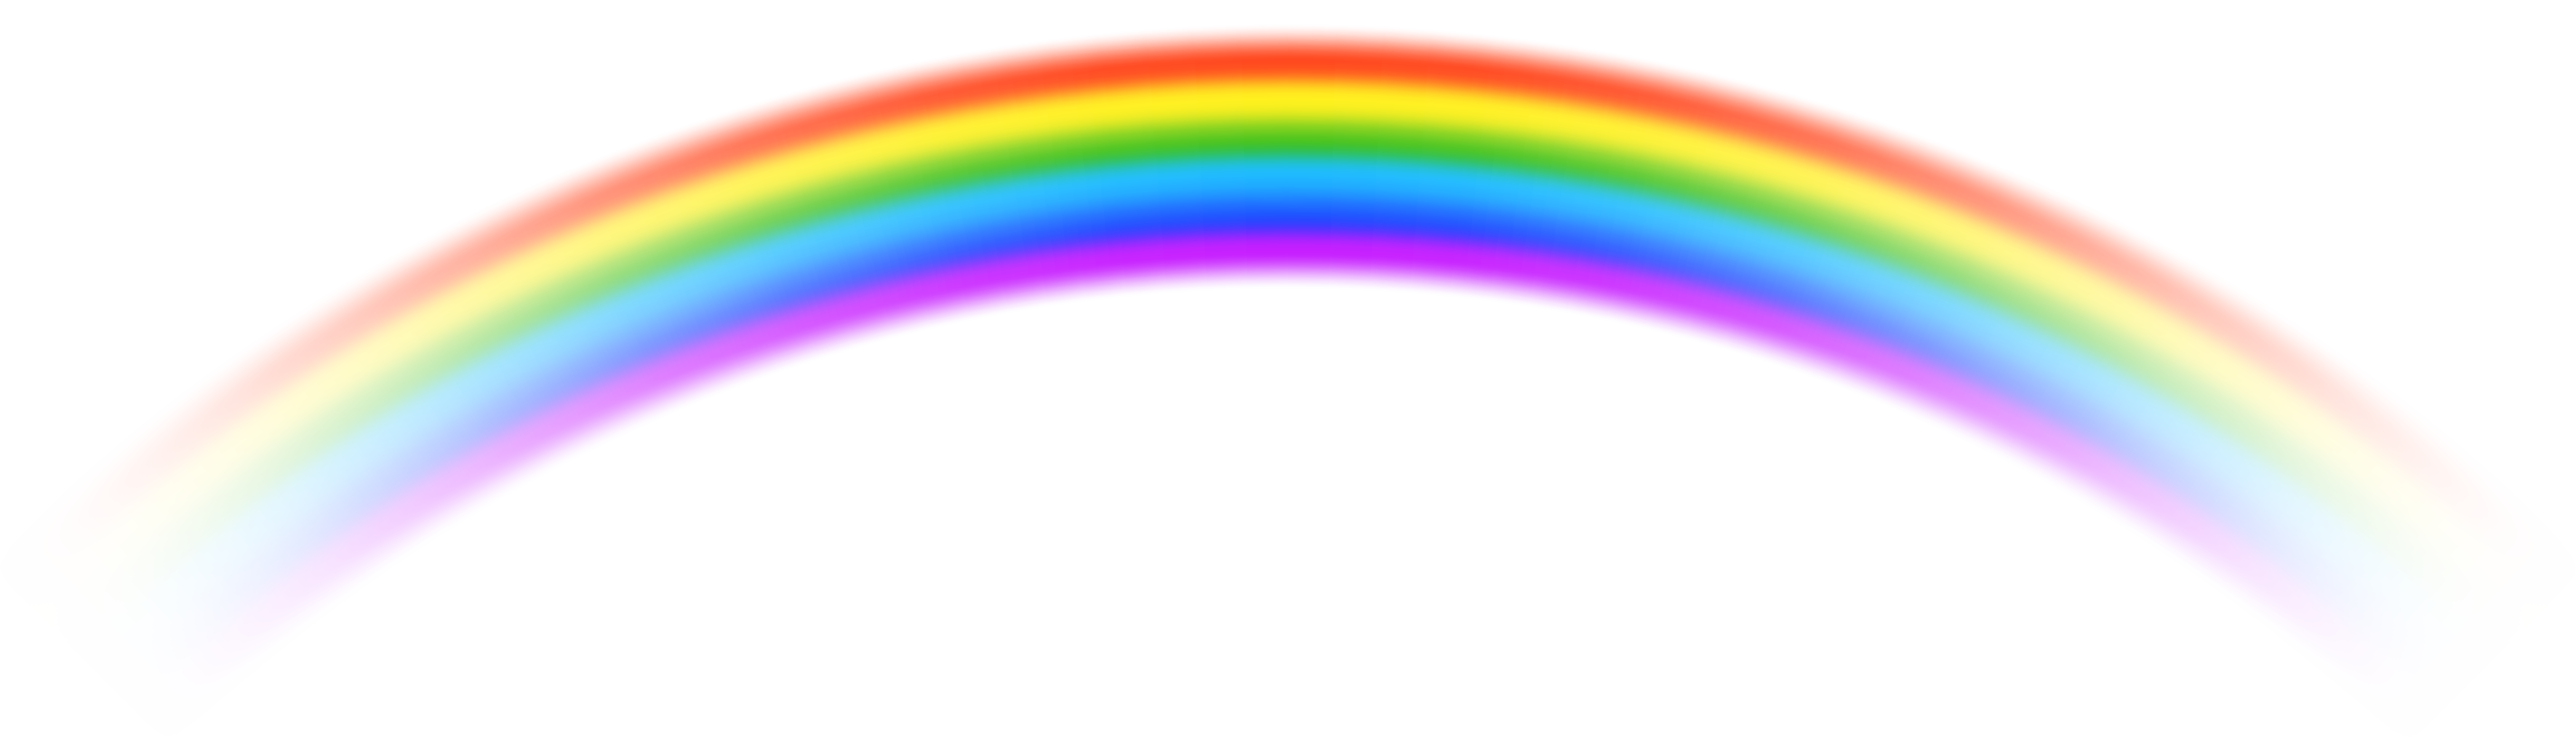 rainbow clipart png - photo #46